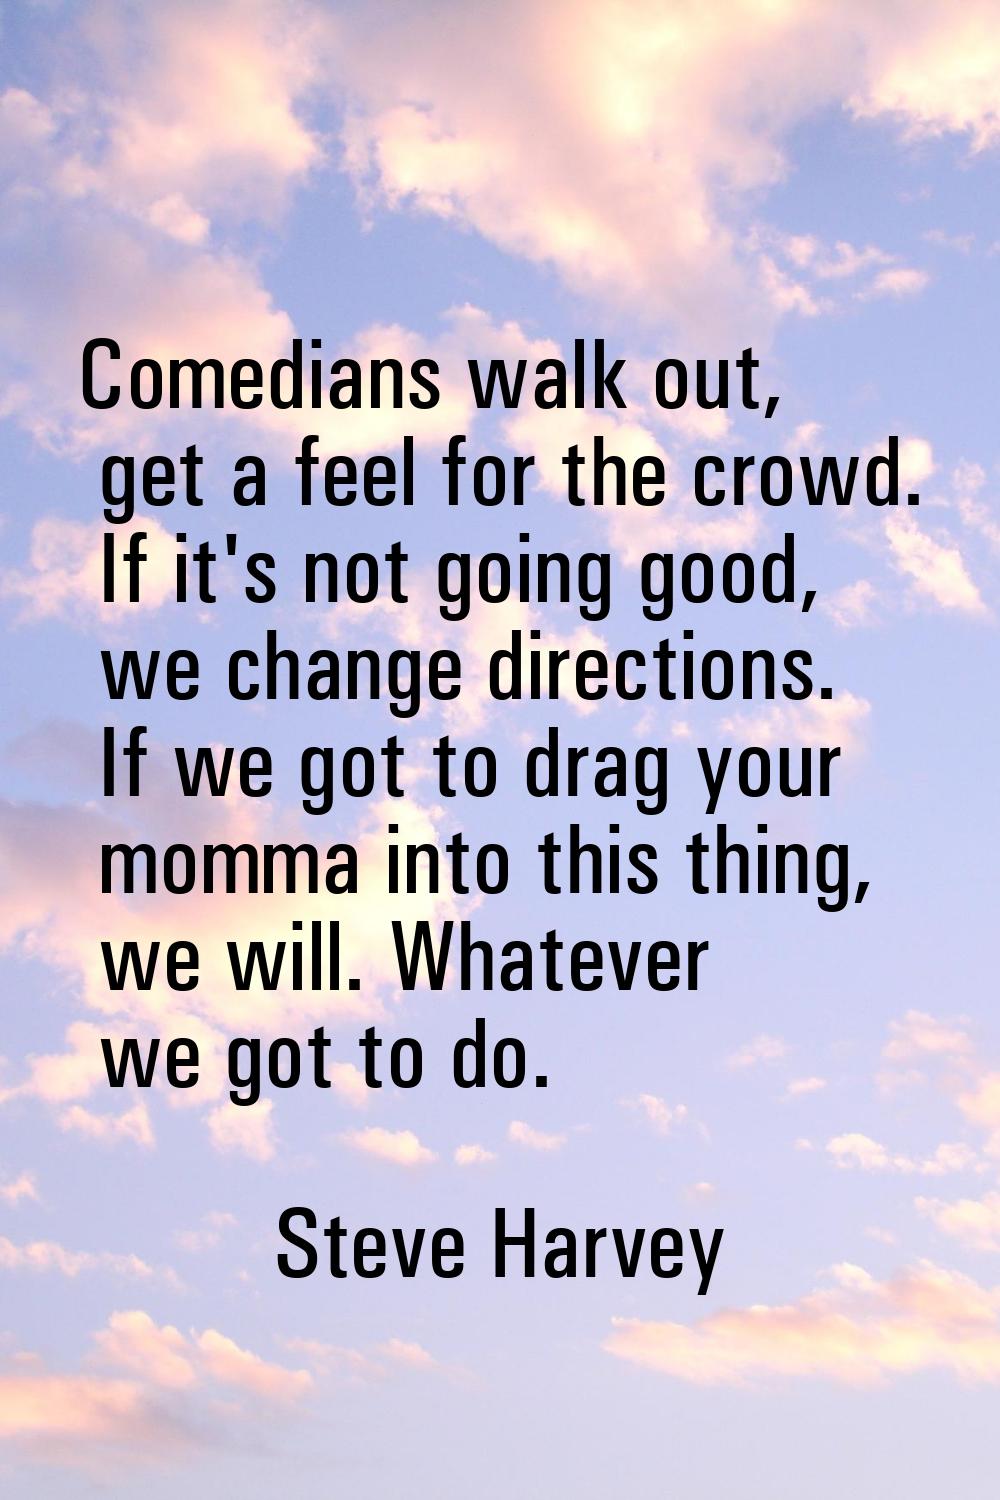 Comedians walk out, get a feel for the crowd. If it's not going good, we change directions. If we g